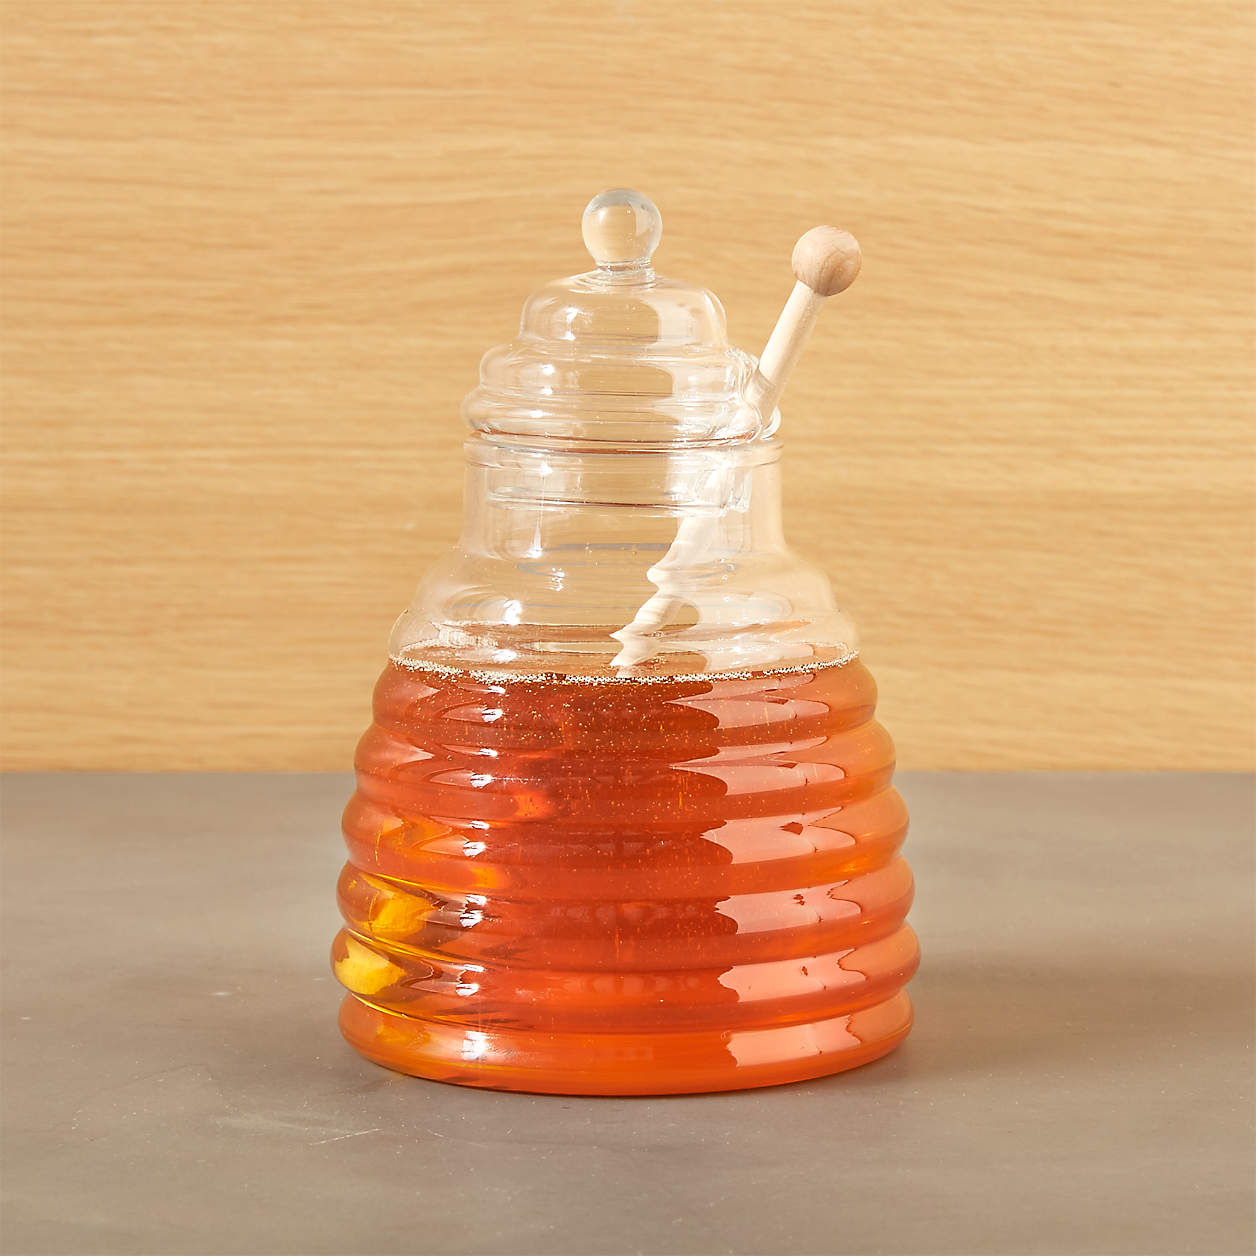 Details about   Crate & Barrel Bee Hive Honey Jar Clear Glass NIB with wooden honey dipper 